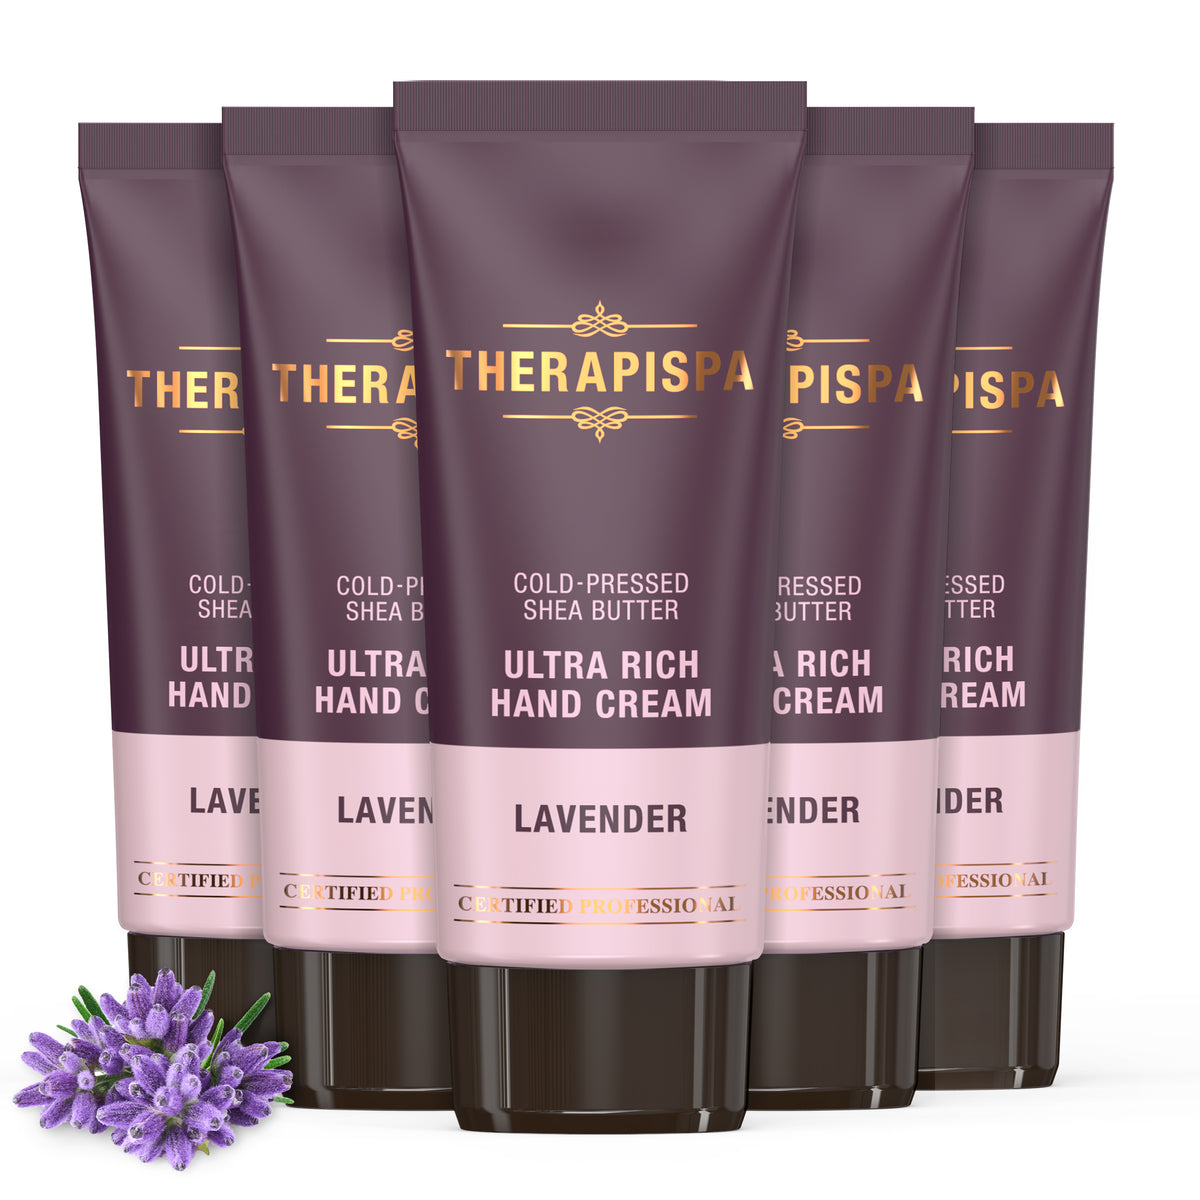 Ultra Rich Hand Cream / Lavender / Pack of 5